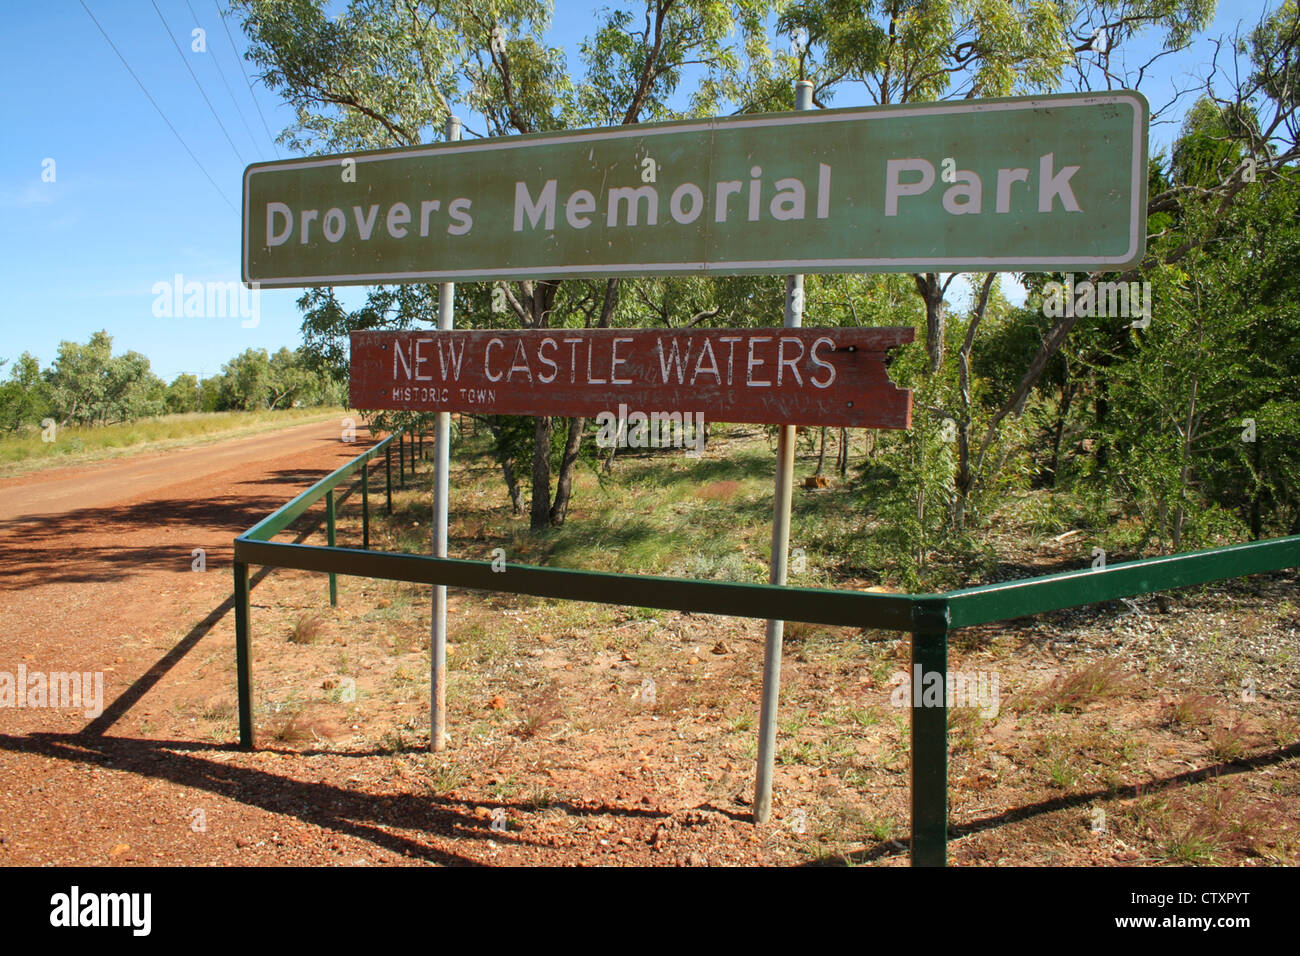 Drover Memorial Park, New Castle Waters sign. Australia Stock Photo